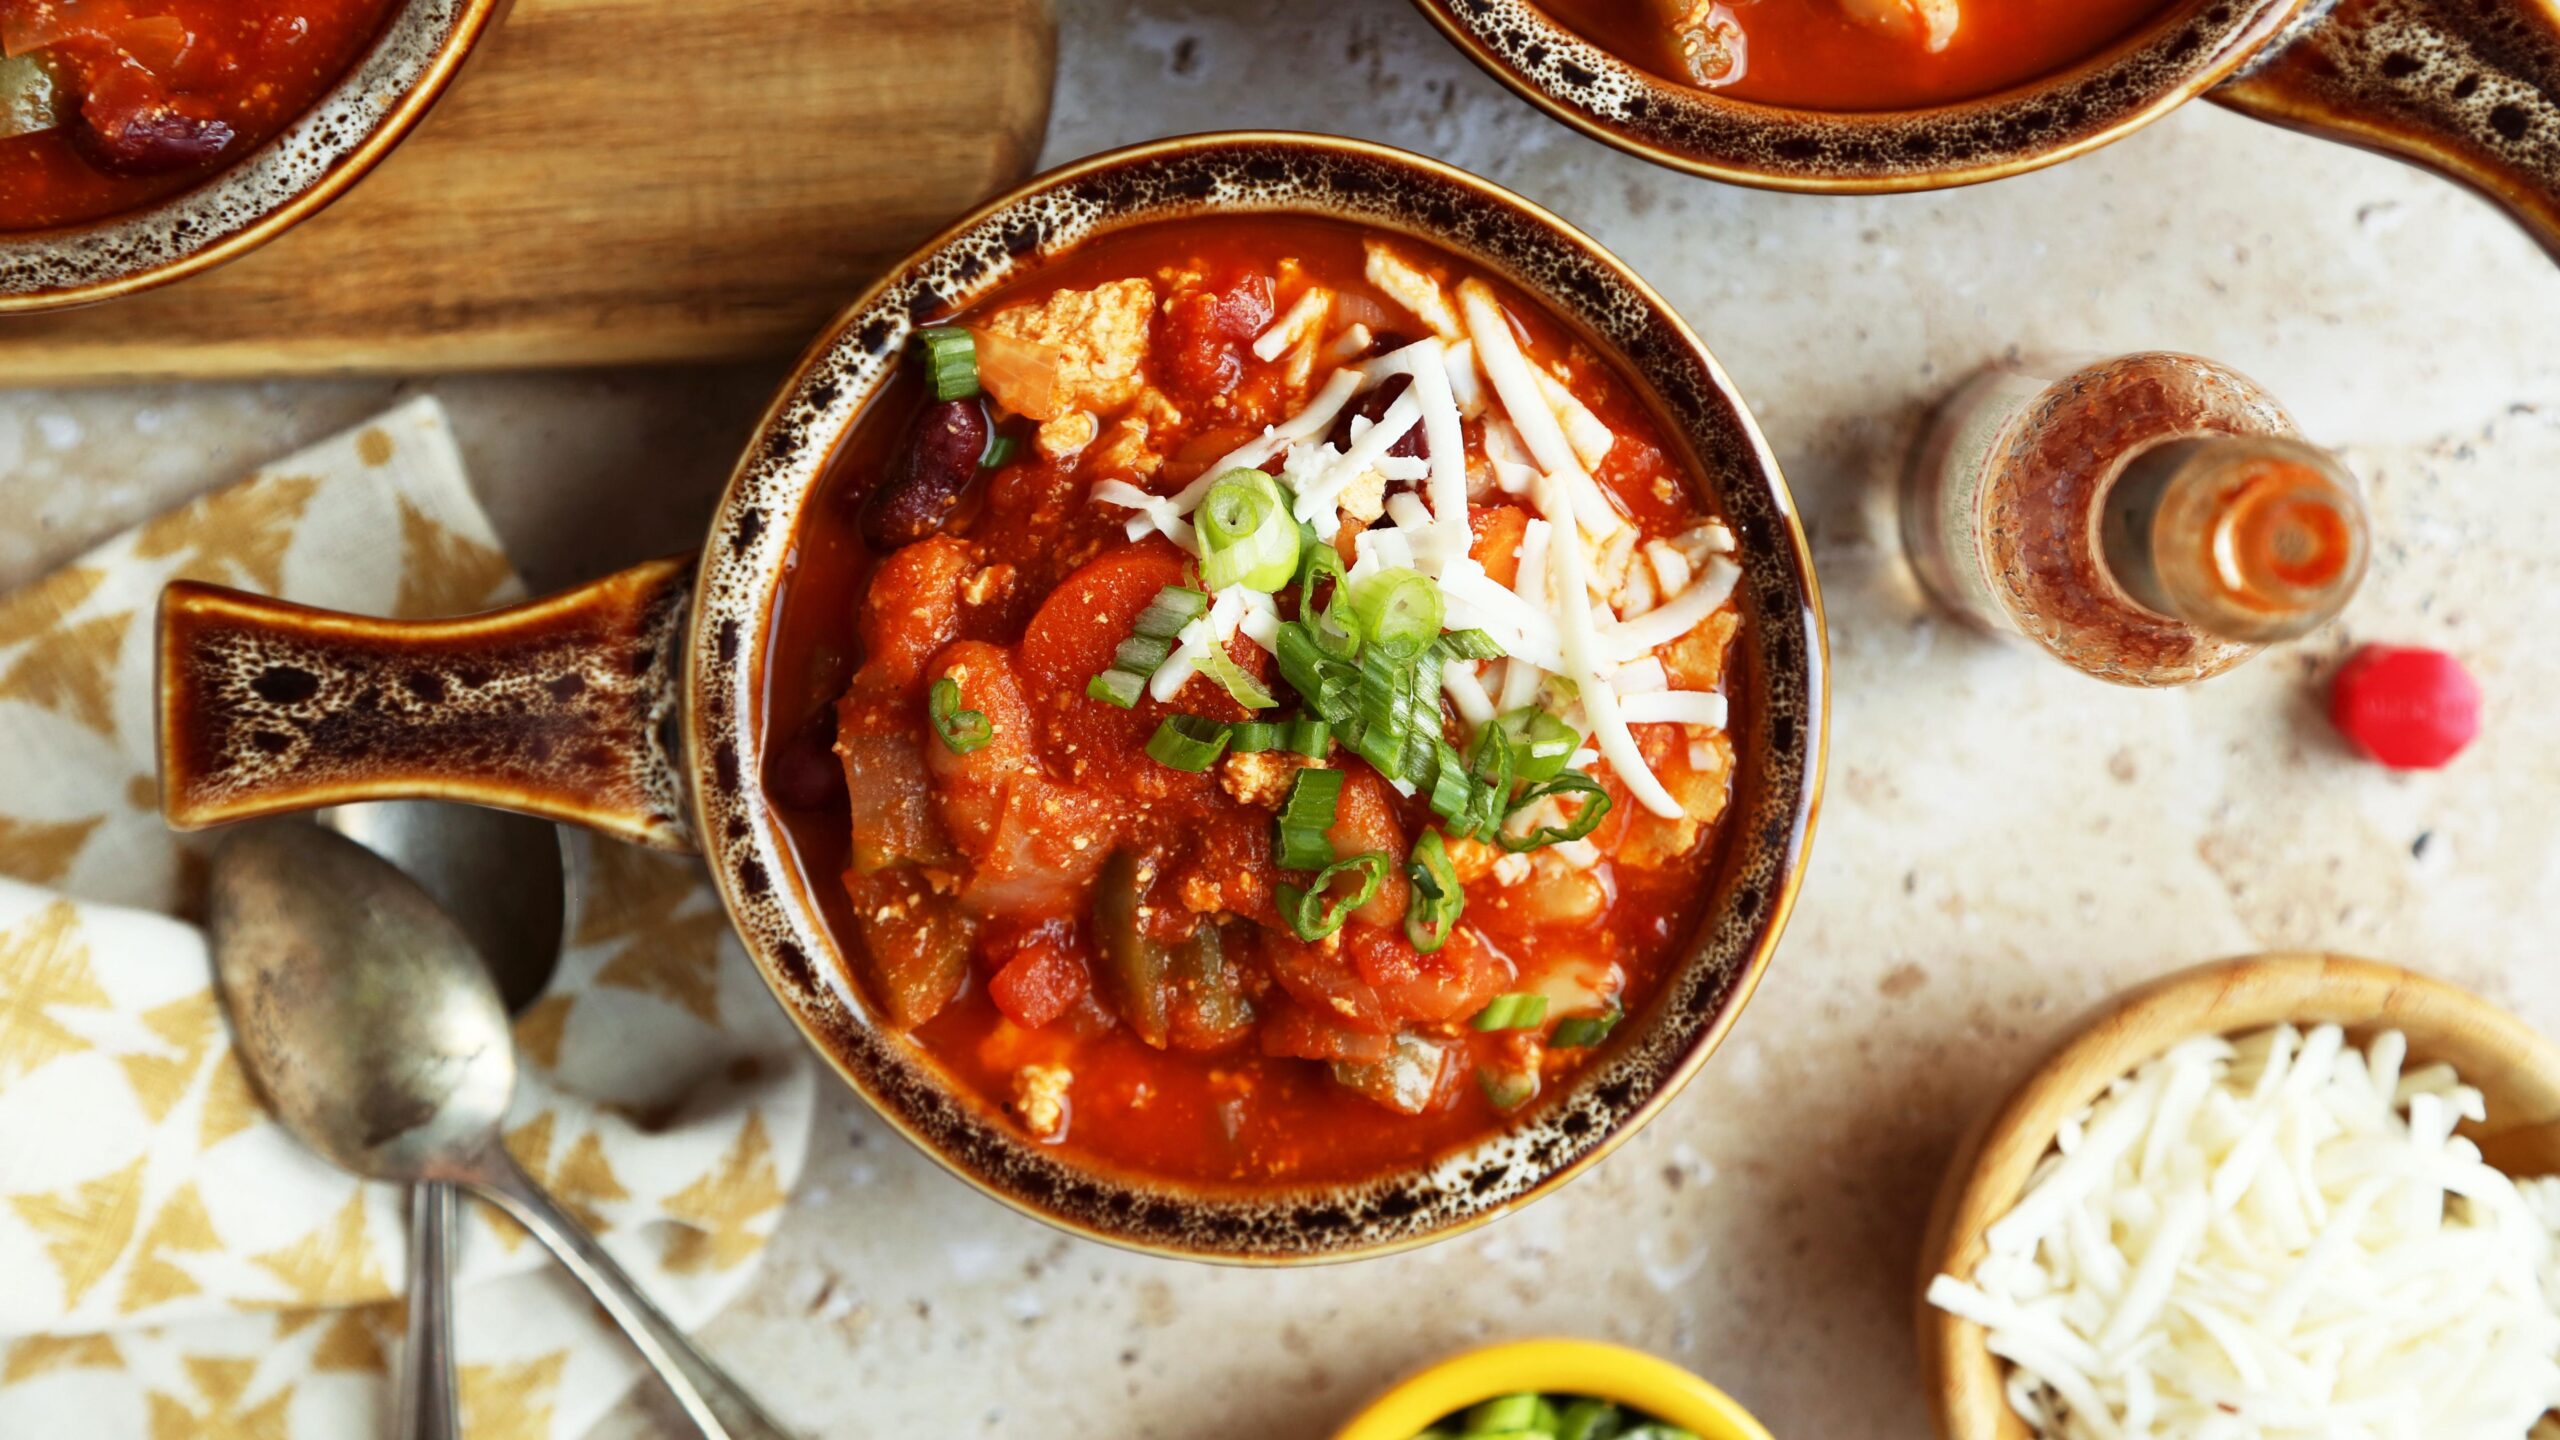  This tofu chili is like a warm hug on a cold day.